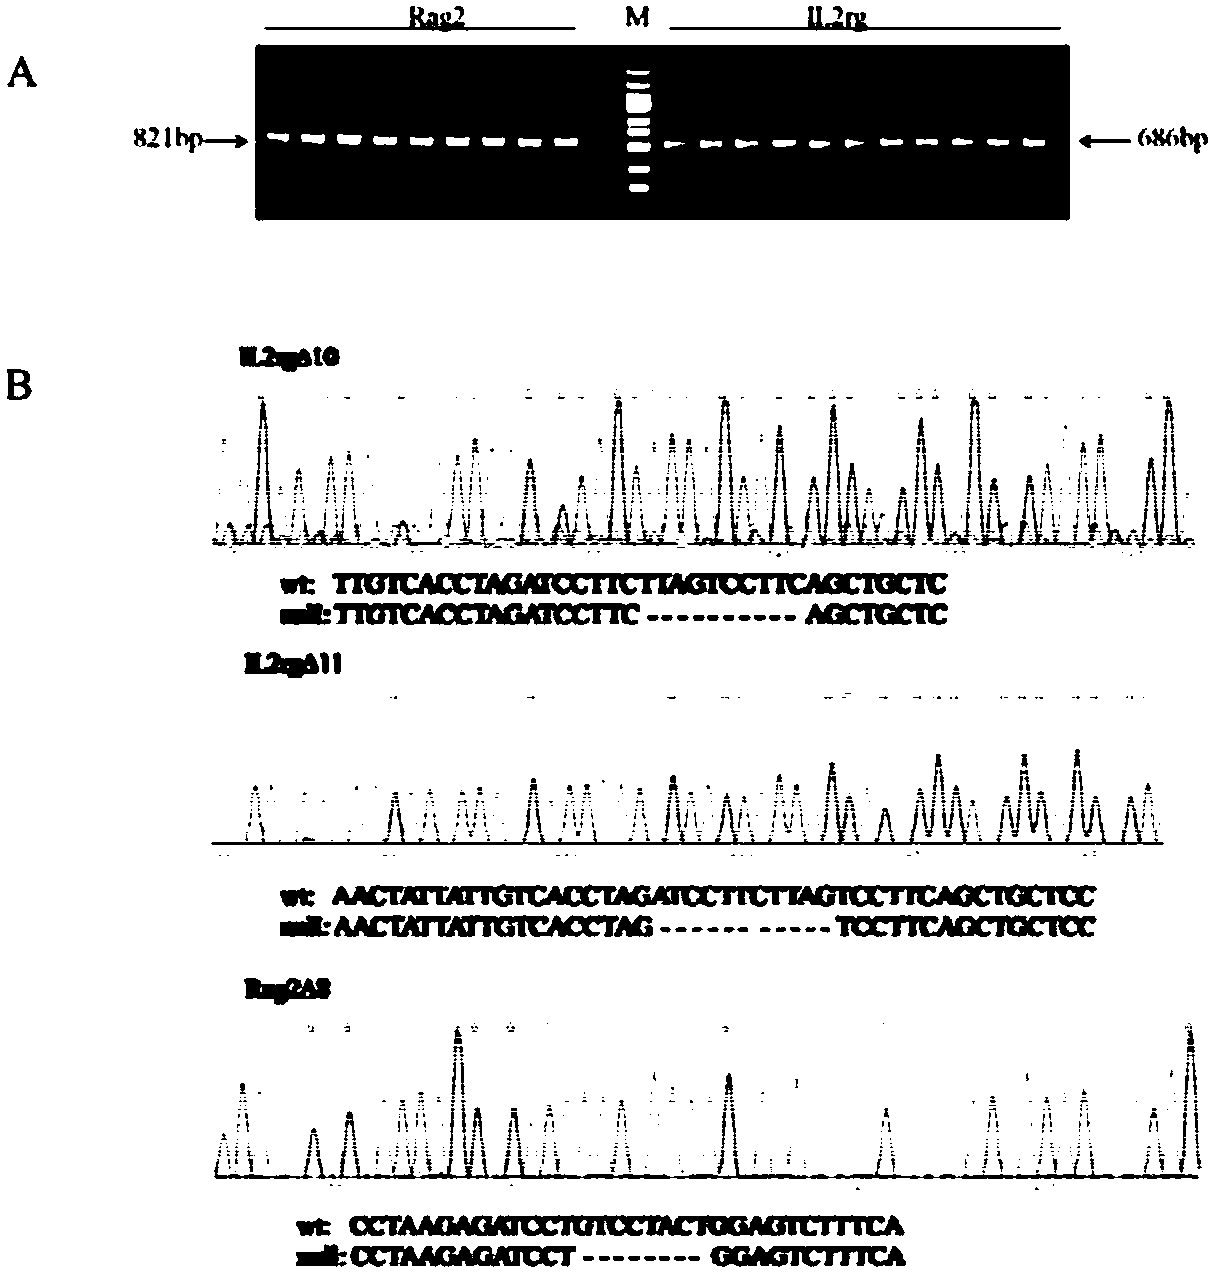 Construction and application of severe combined immunodeficiency animal model